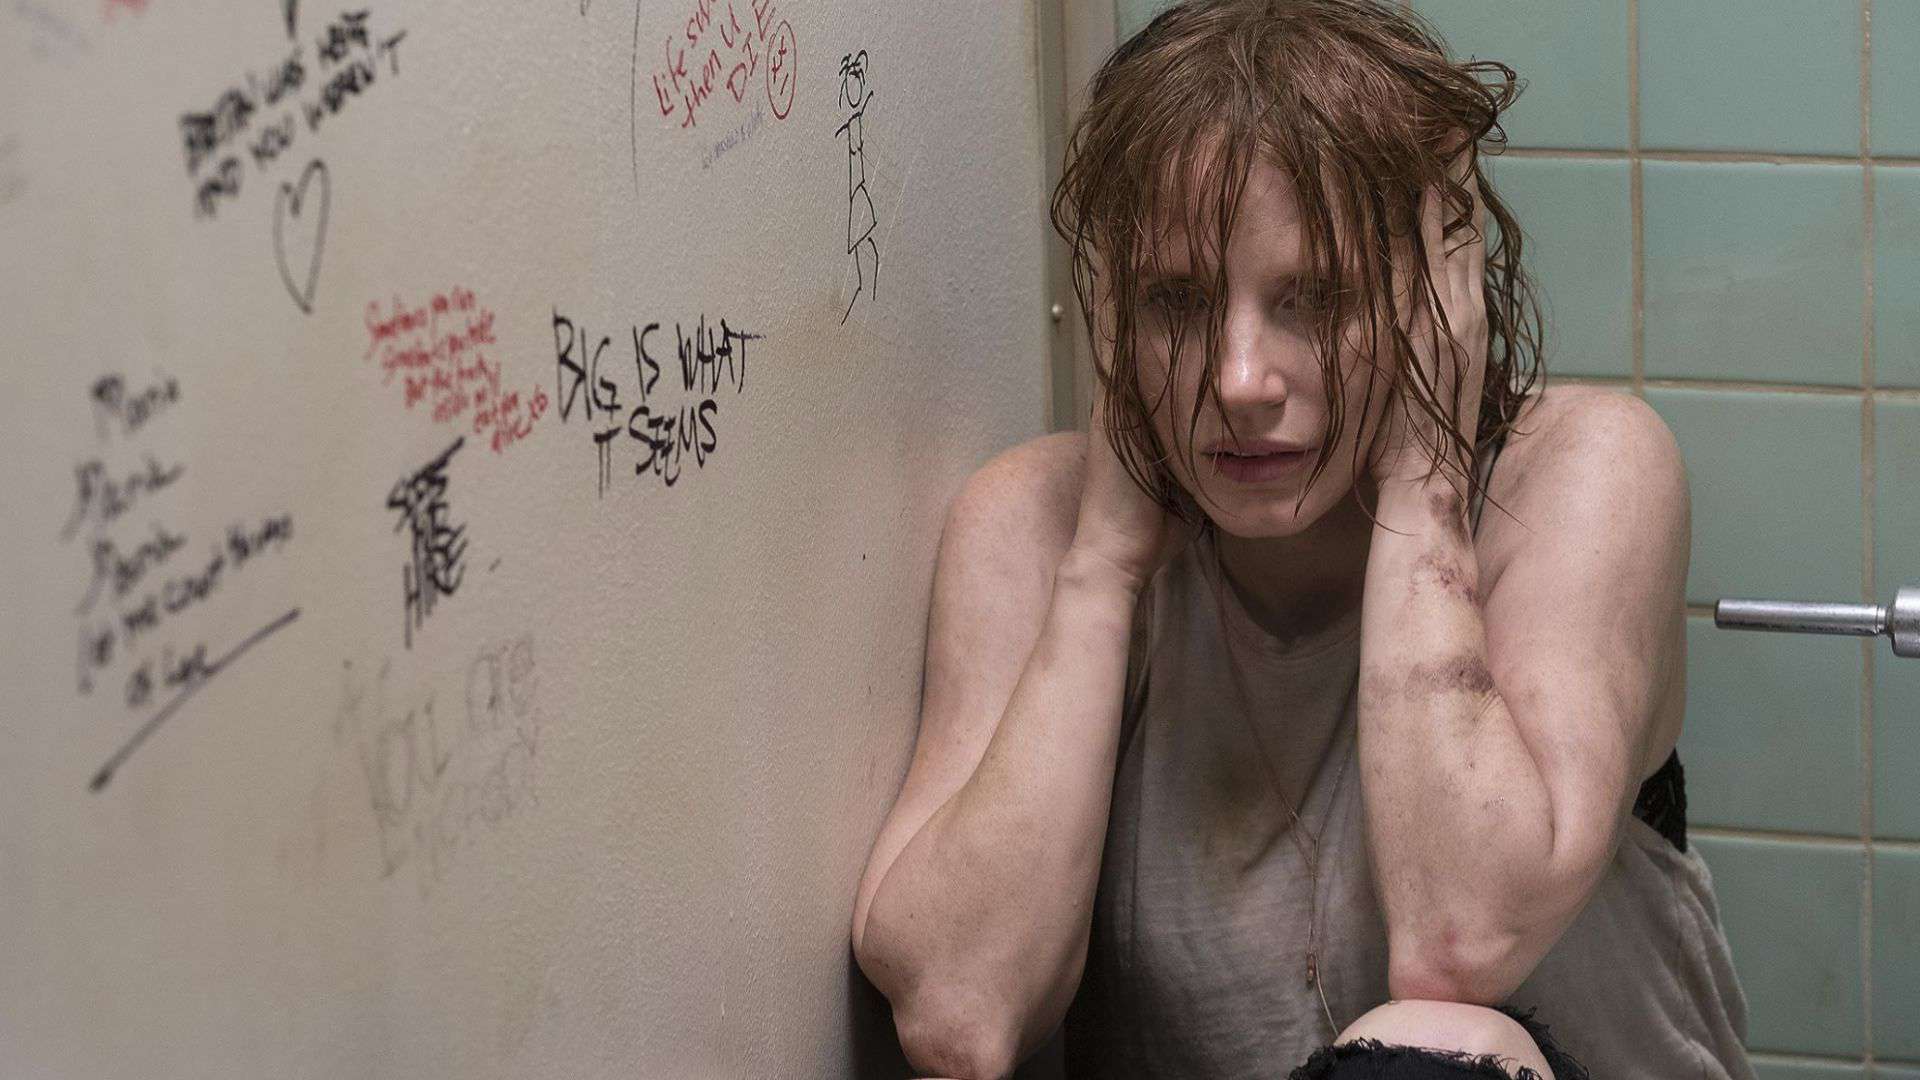 A woman hides in a bathroom stall in this image from New Line Cinema.